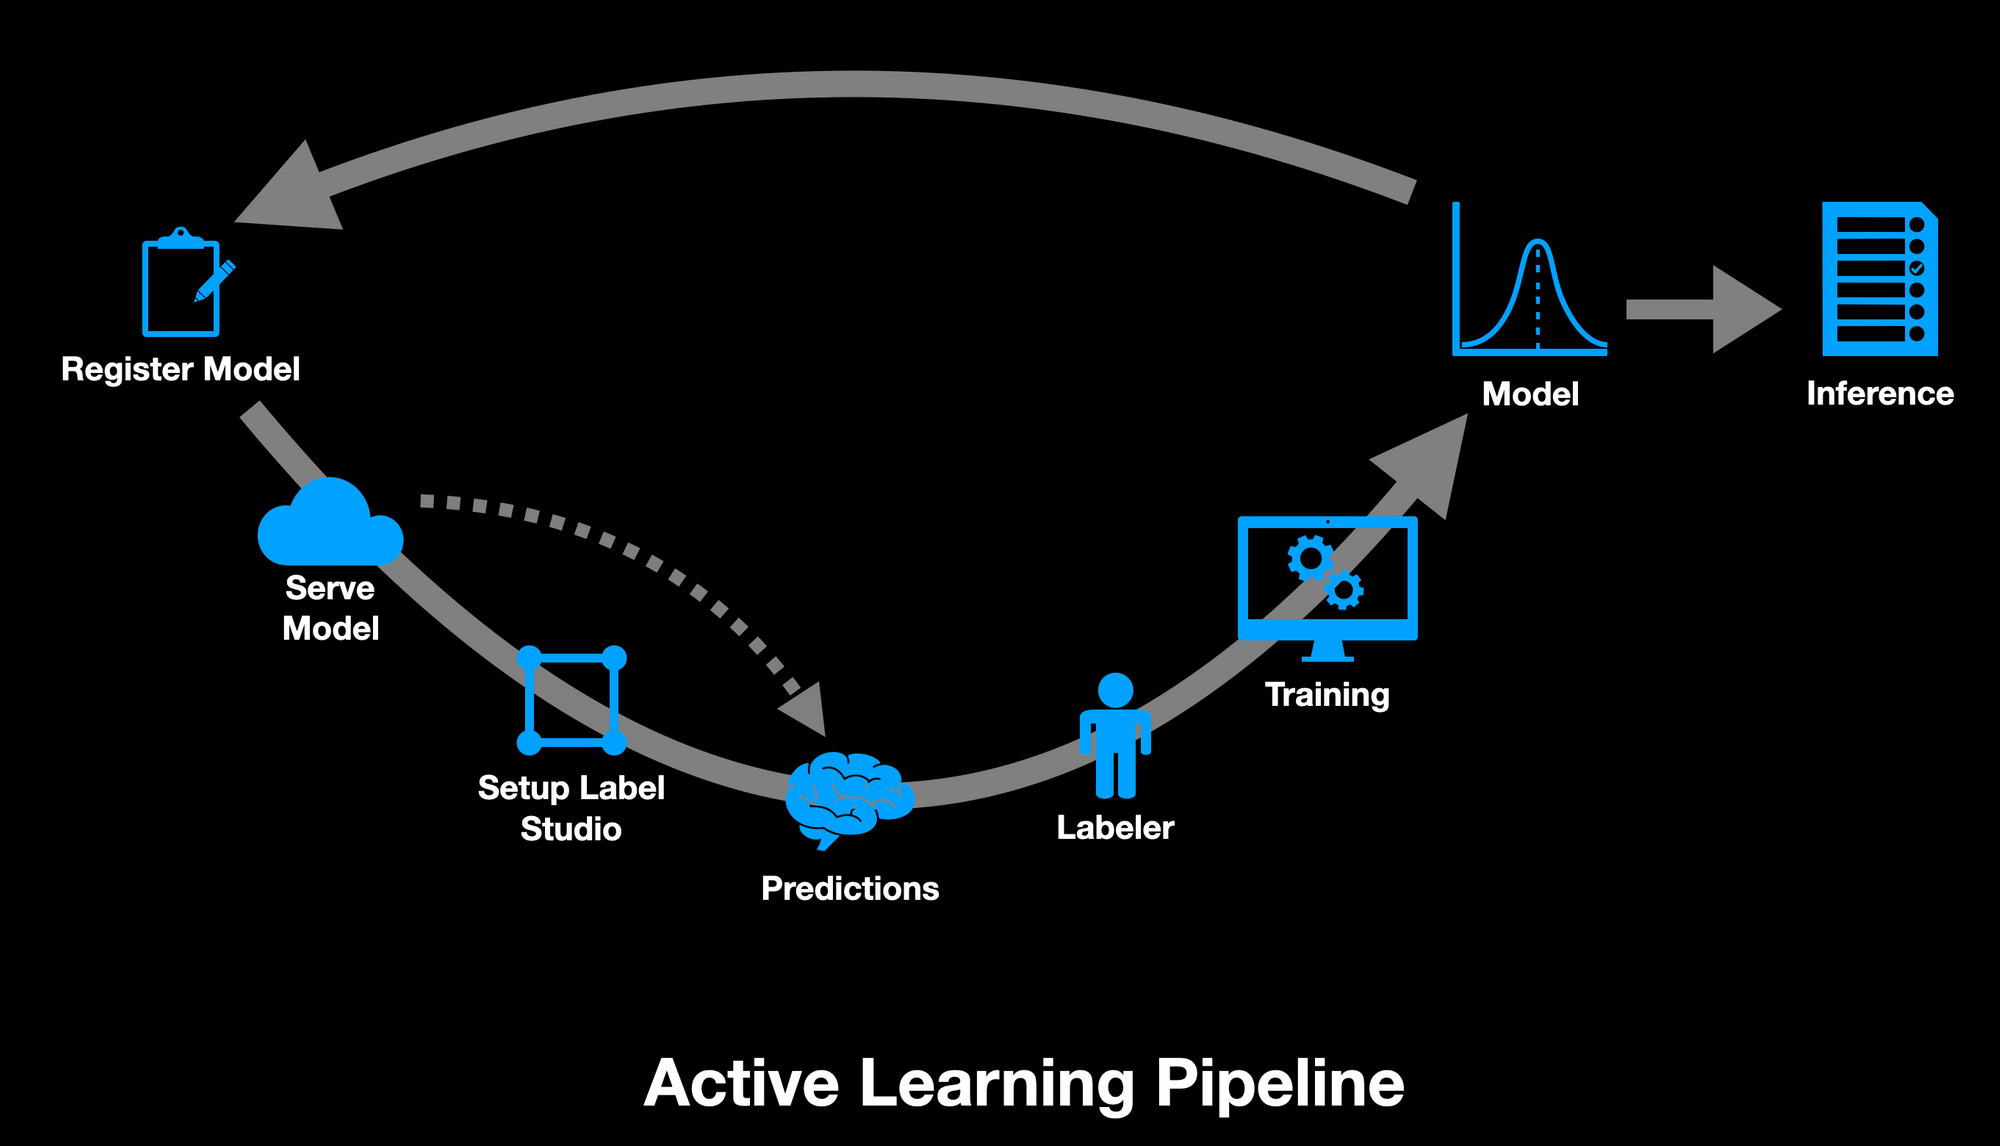 A diagram of the active learning pipeline implemented in this 2-part tutorial. It starts with Register Model and then flows through Serve Model, Setup Label Studio, Predictions, Labeler, Training, Model. From there are two paths, one to Inference and one back to the beginning.